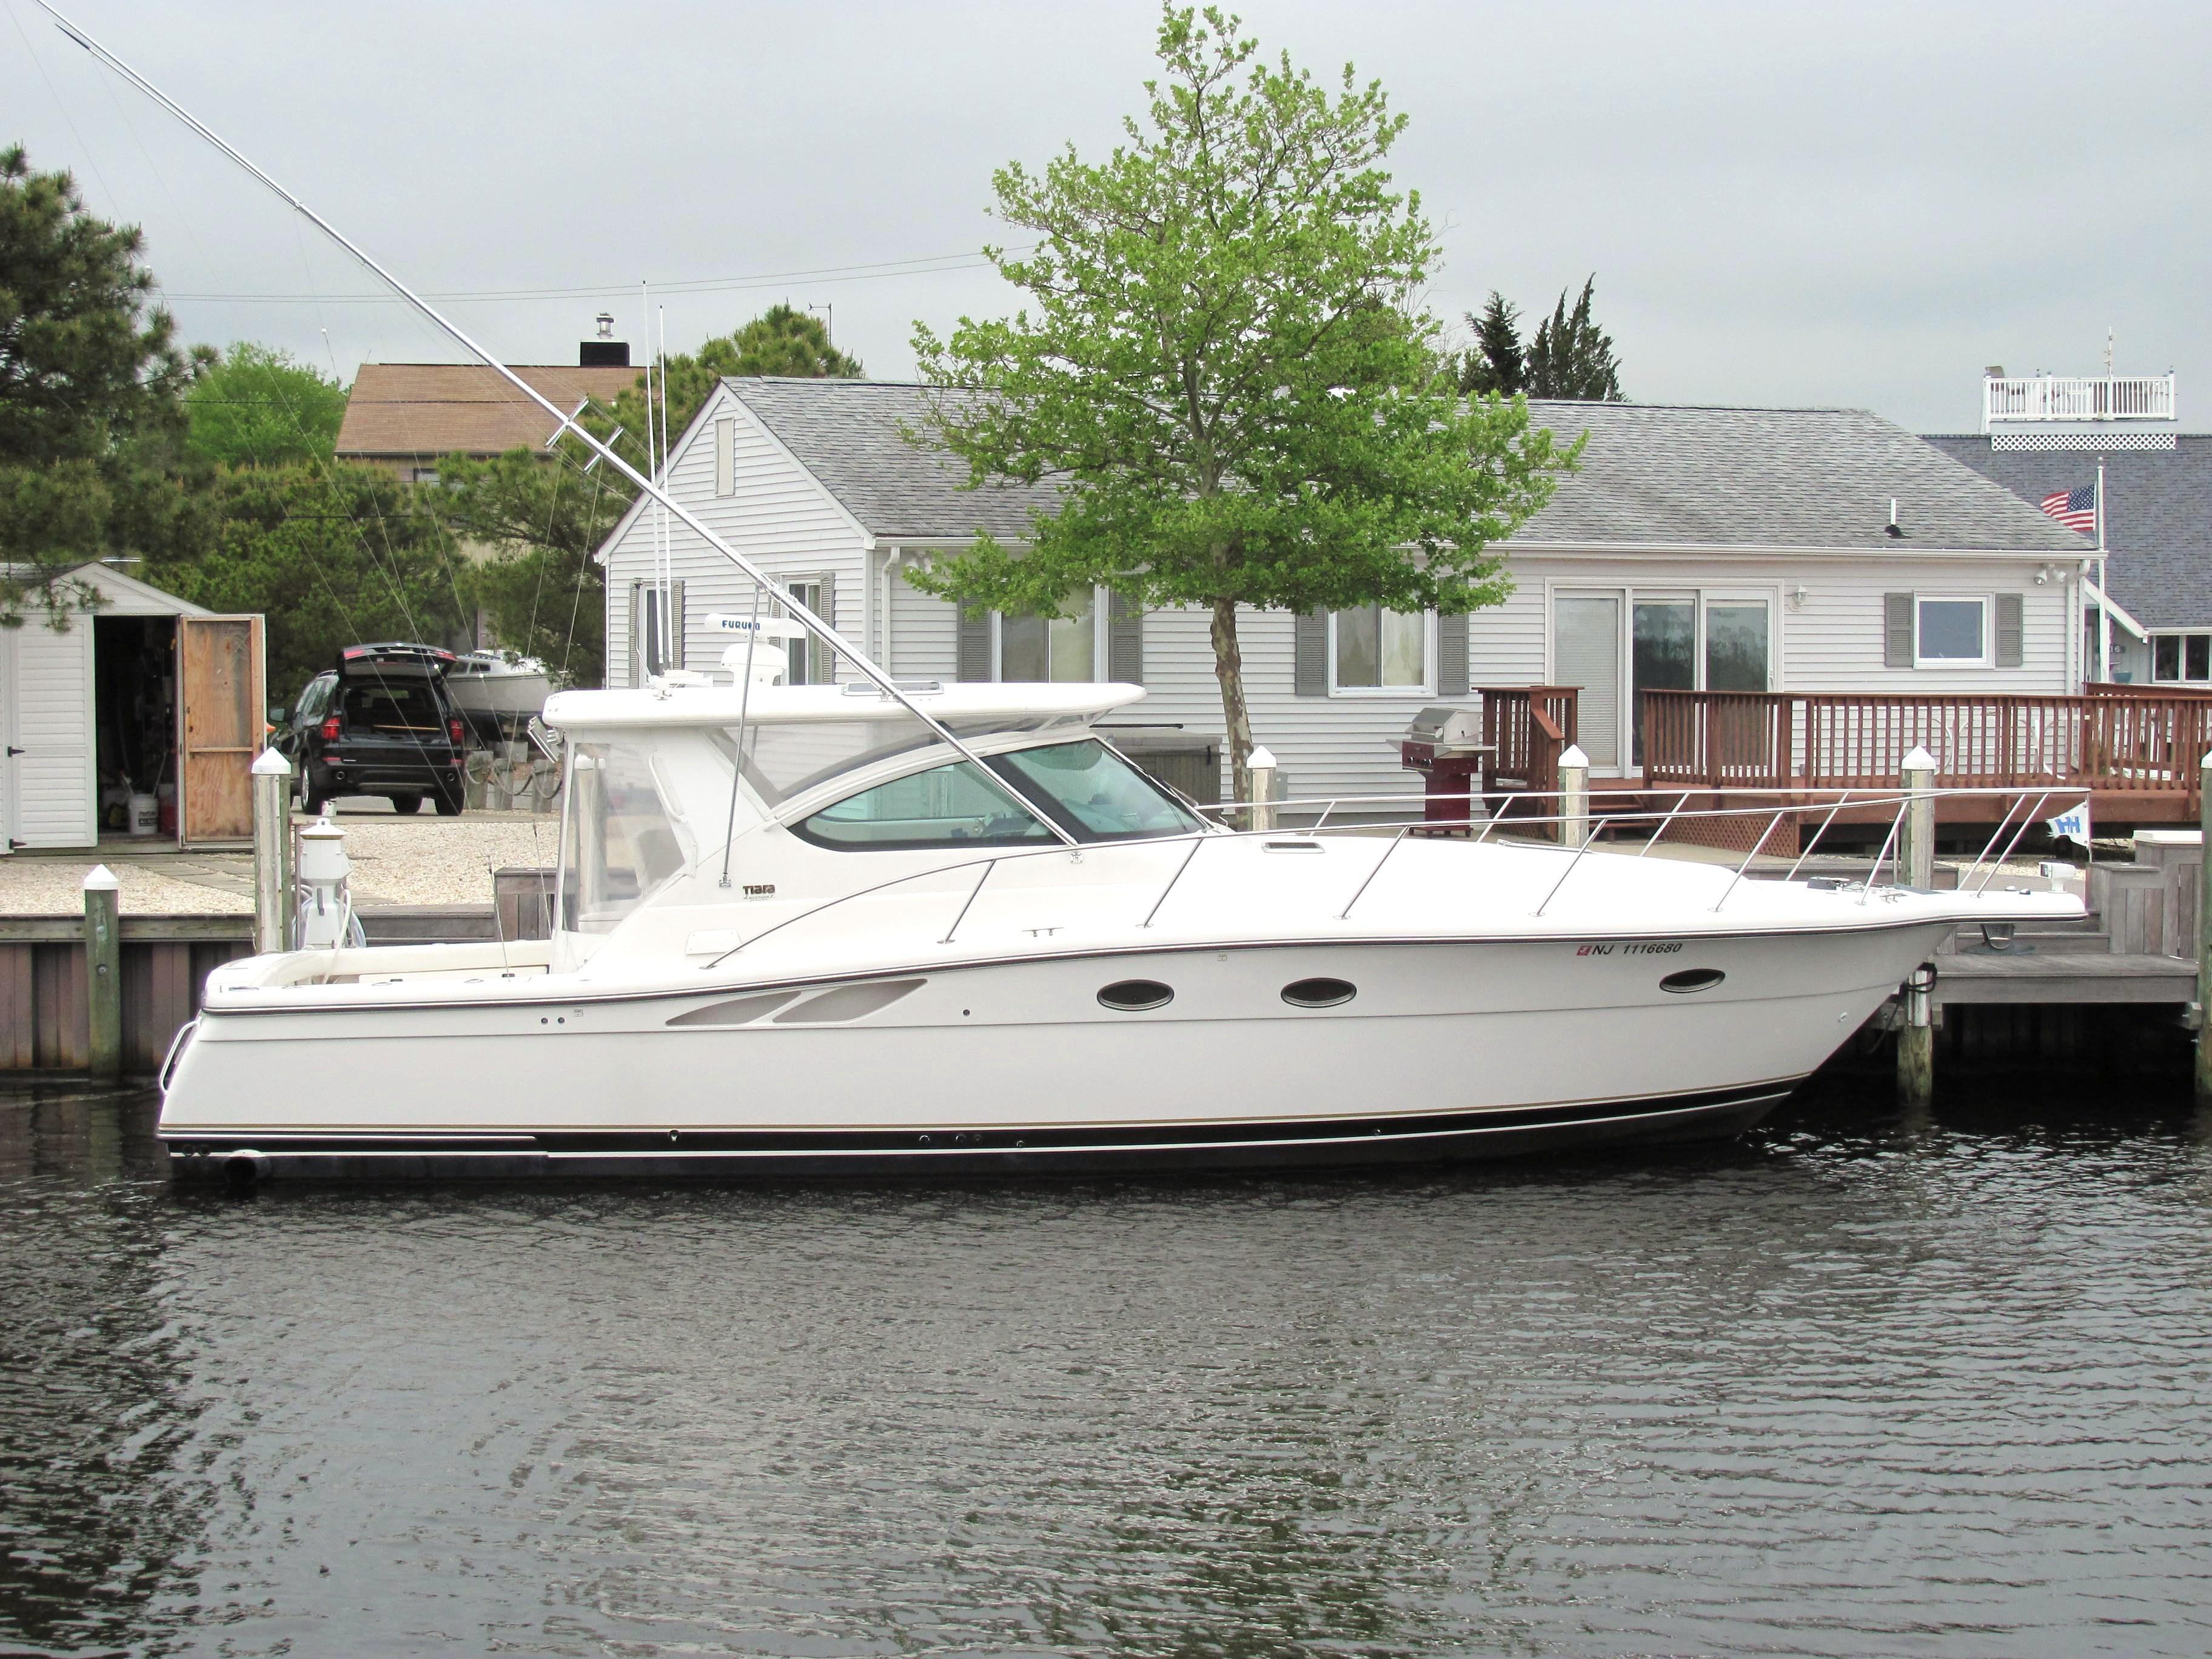 Tiara 3800 Open, Forked River